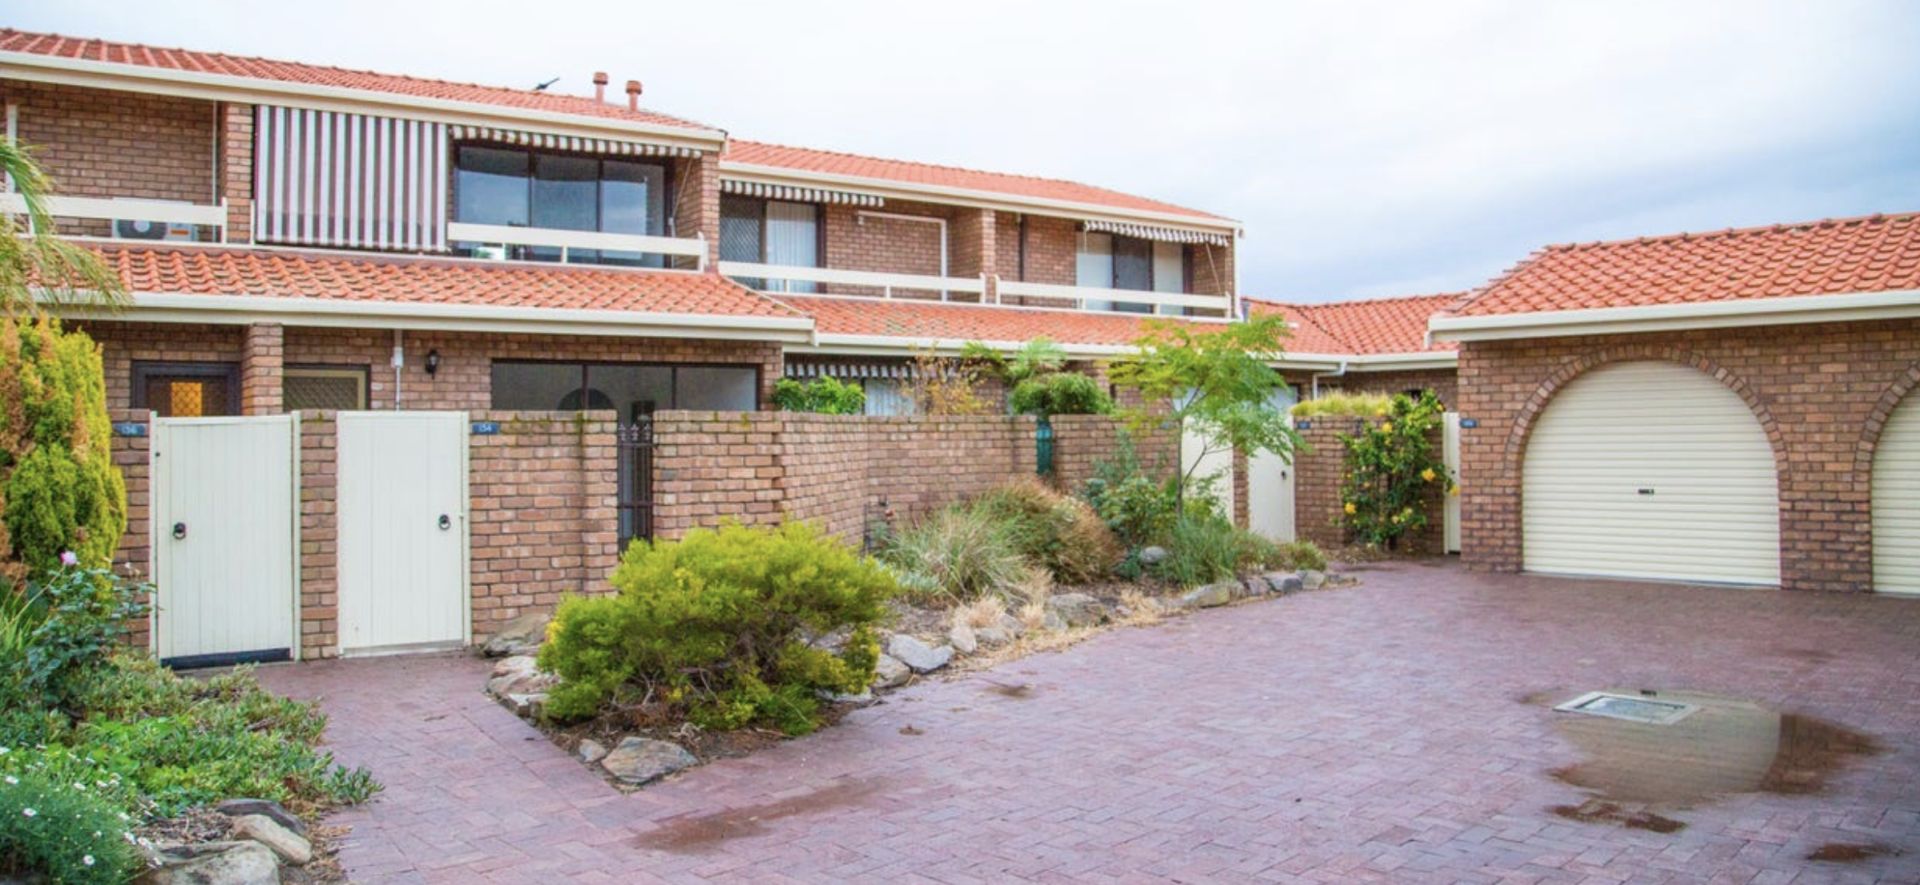 2 bedrooms Townhouse in 19/130 Sportsmans Drive WEST LAKES SA, 5021